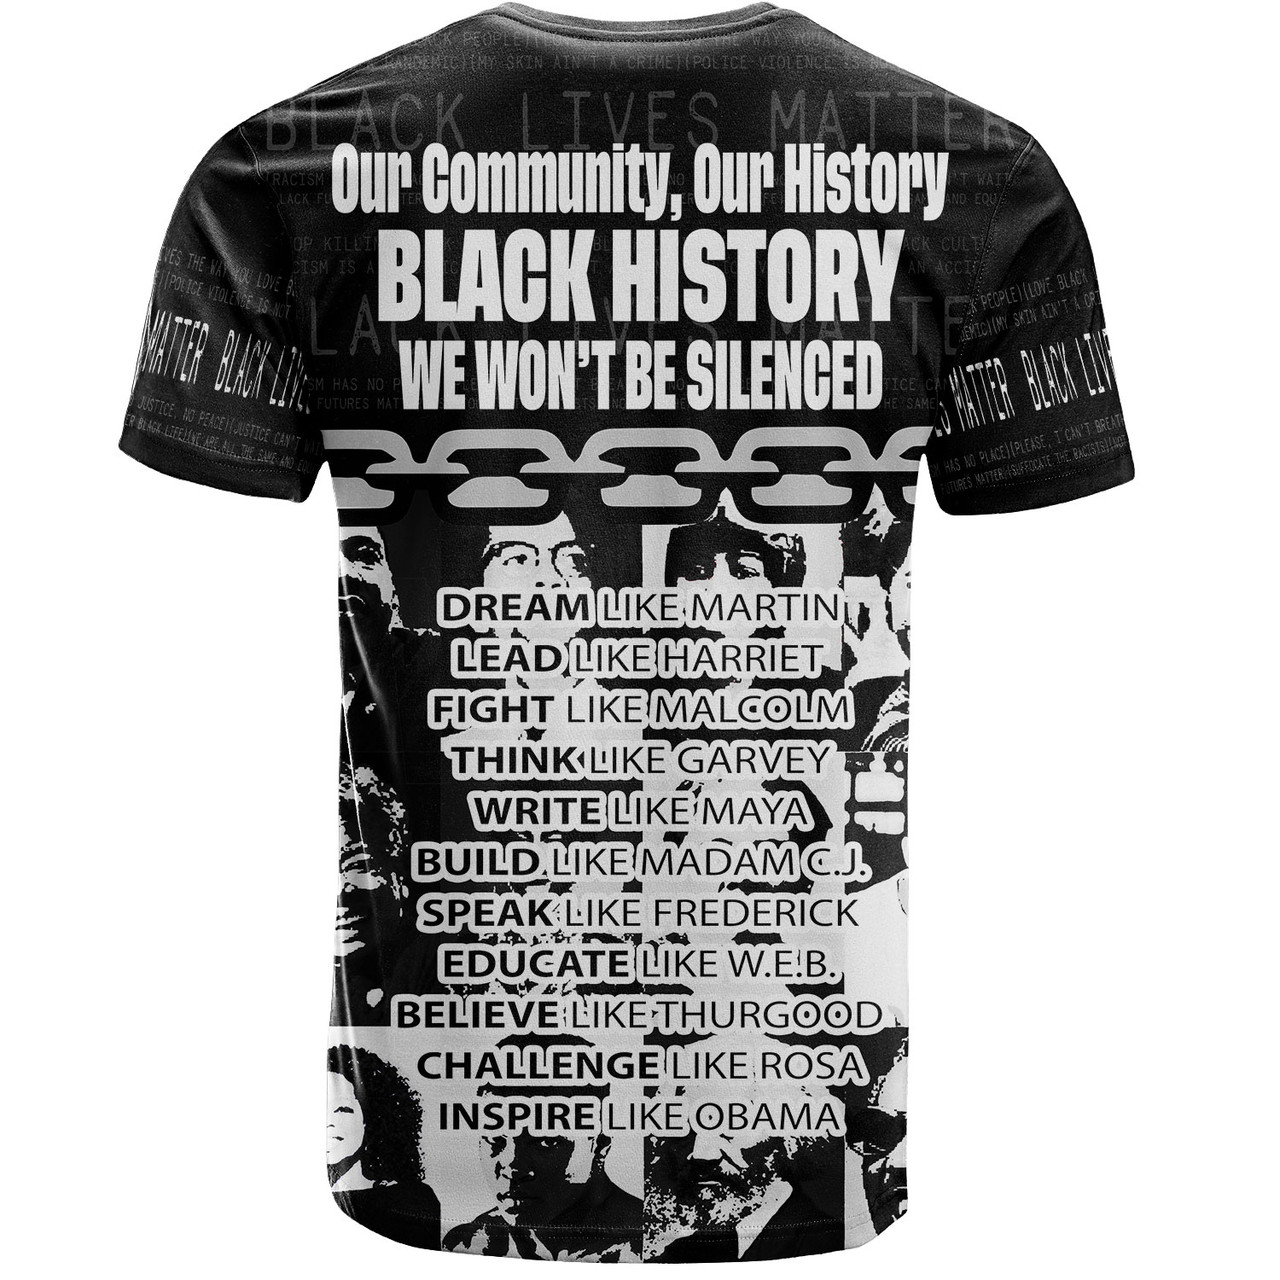 African Black History Month T-shirt - Custom Black Resistance African American Civil Rights Leaders T-shirt